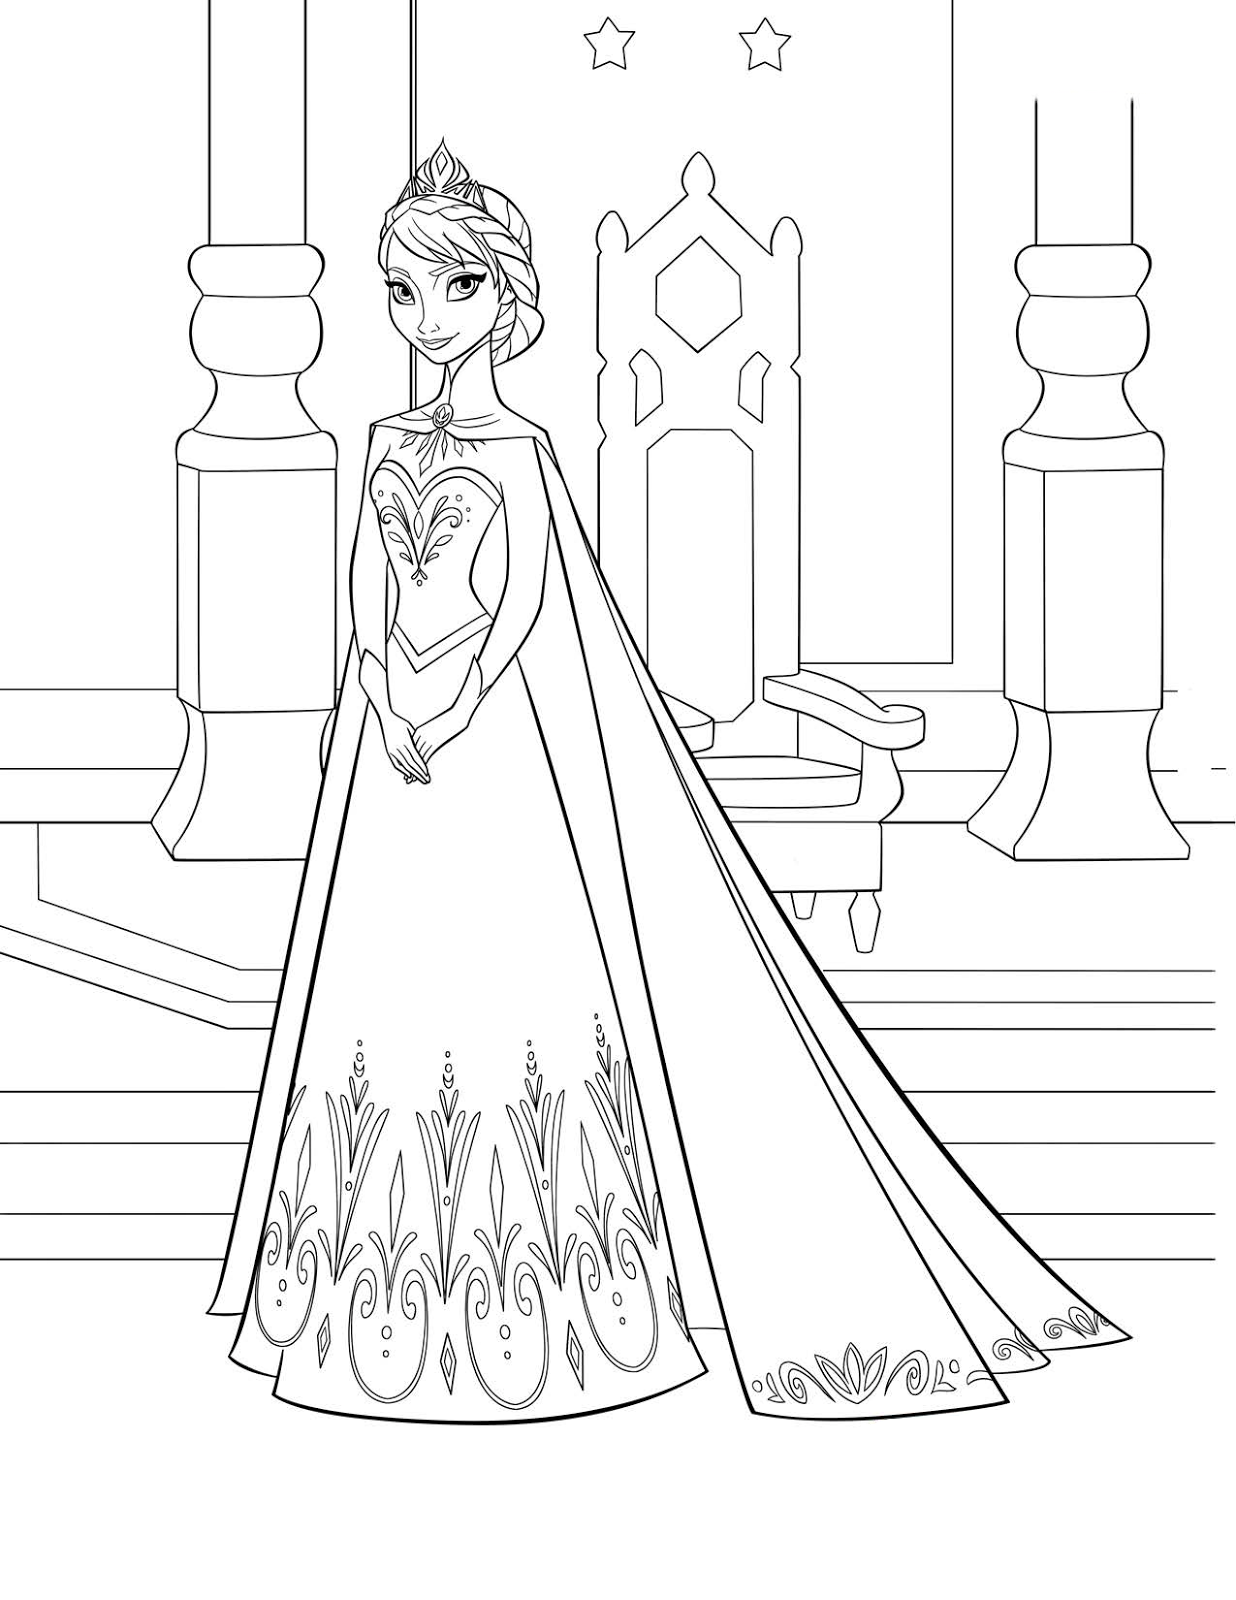 Coloring Pages: Disneys FROZEN coloring pages